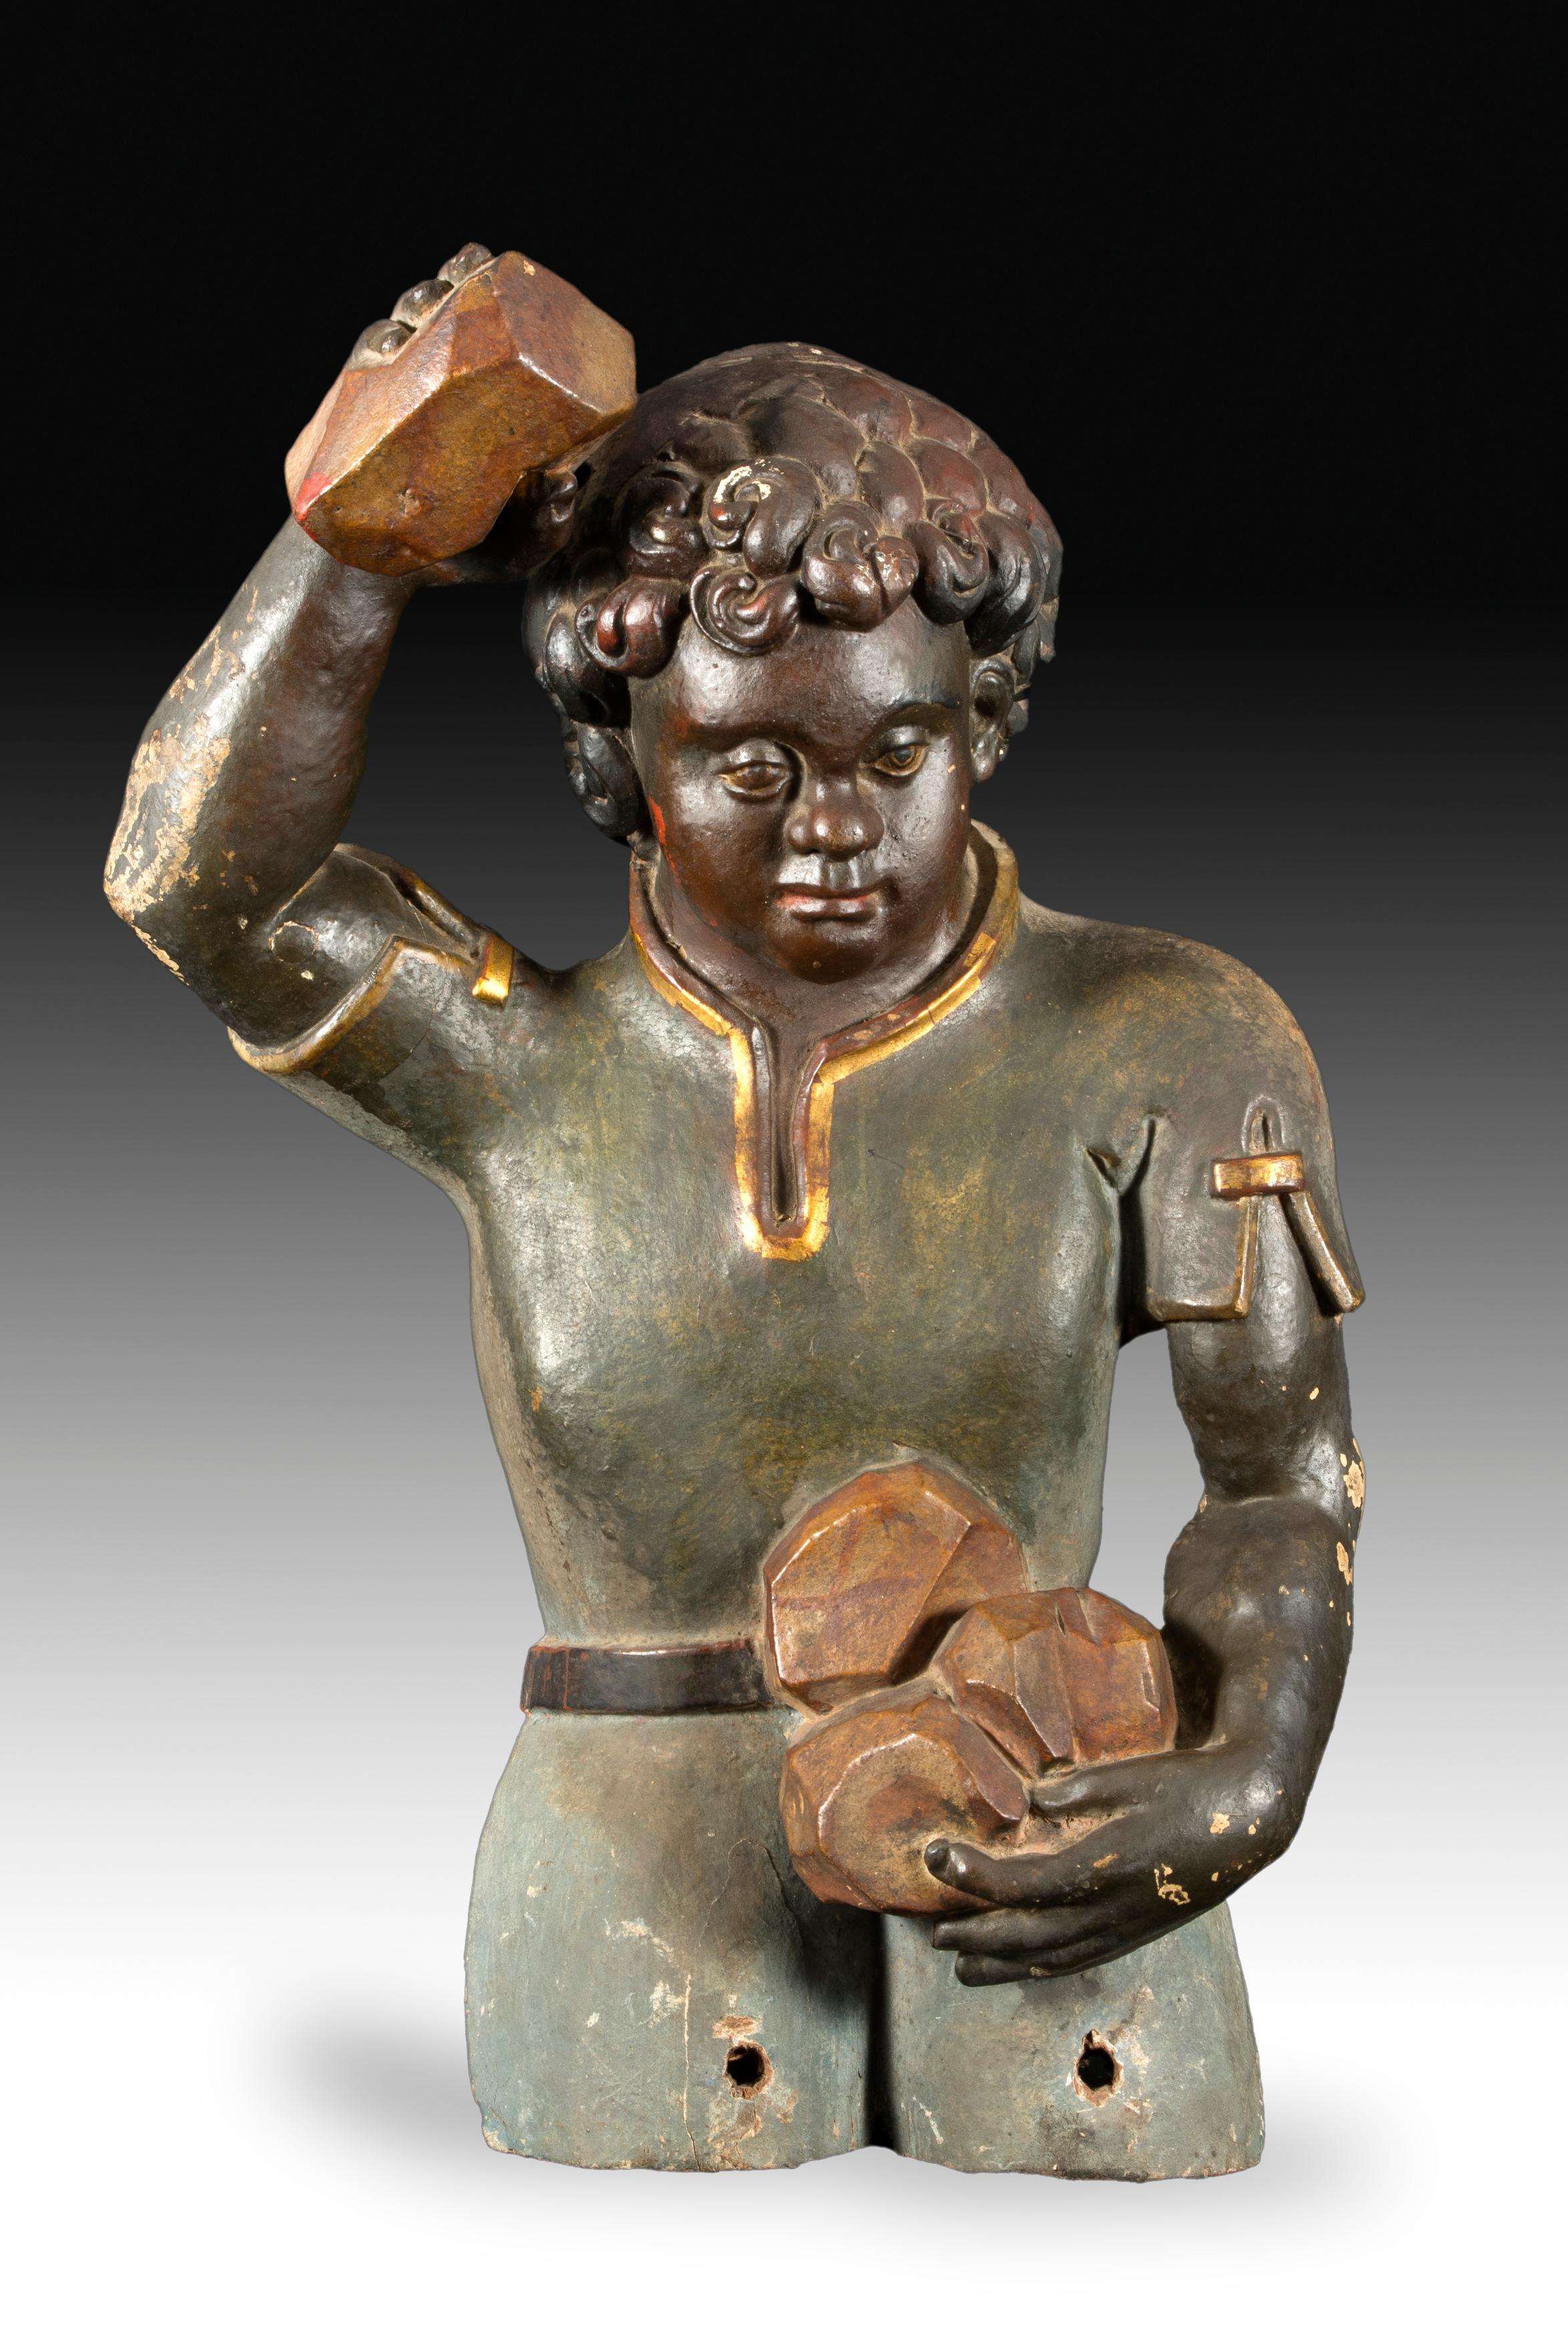 Male figure represented with the look down and throwing stones, with polychrome and original overdorado. The absence of carving on the back shows that it was part of an altarpiece, participating in subjects such as, for example, the Stoning of San